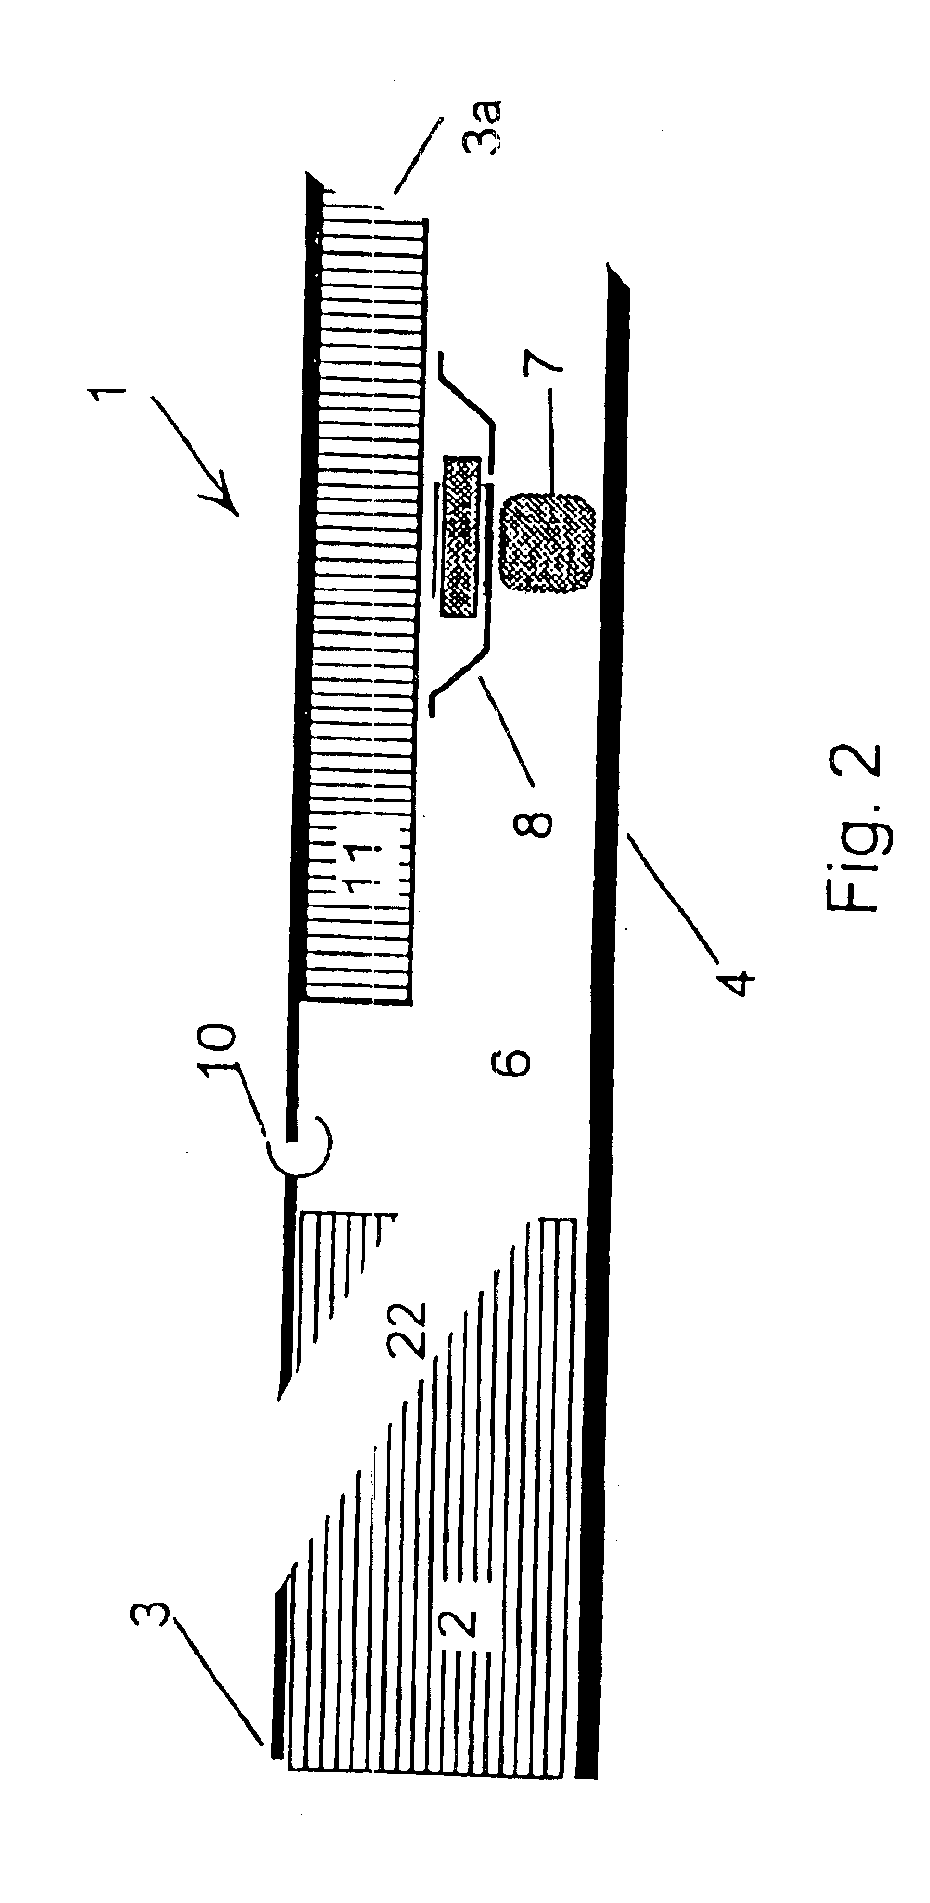 Door with structural components configured to radiate acoustic Energy